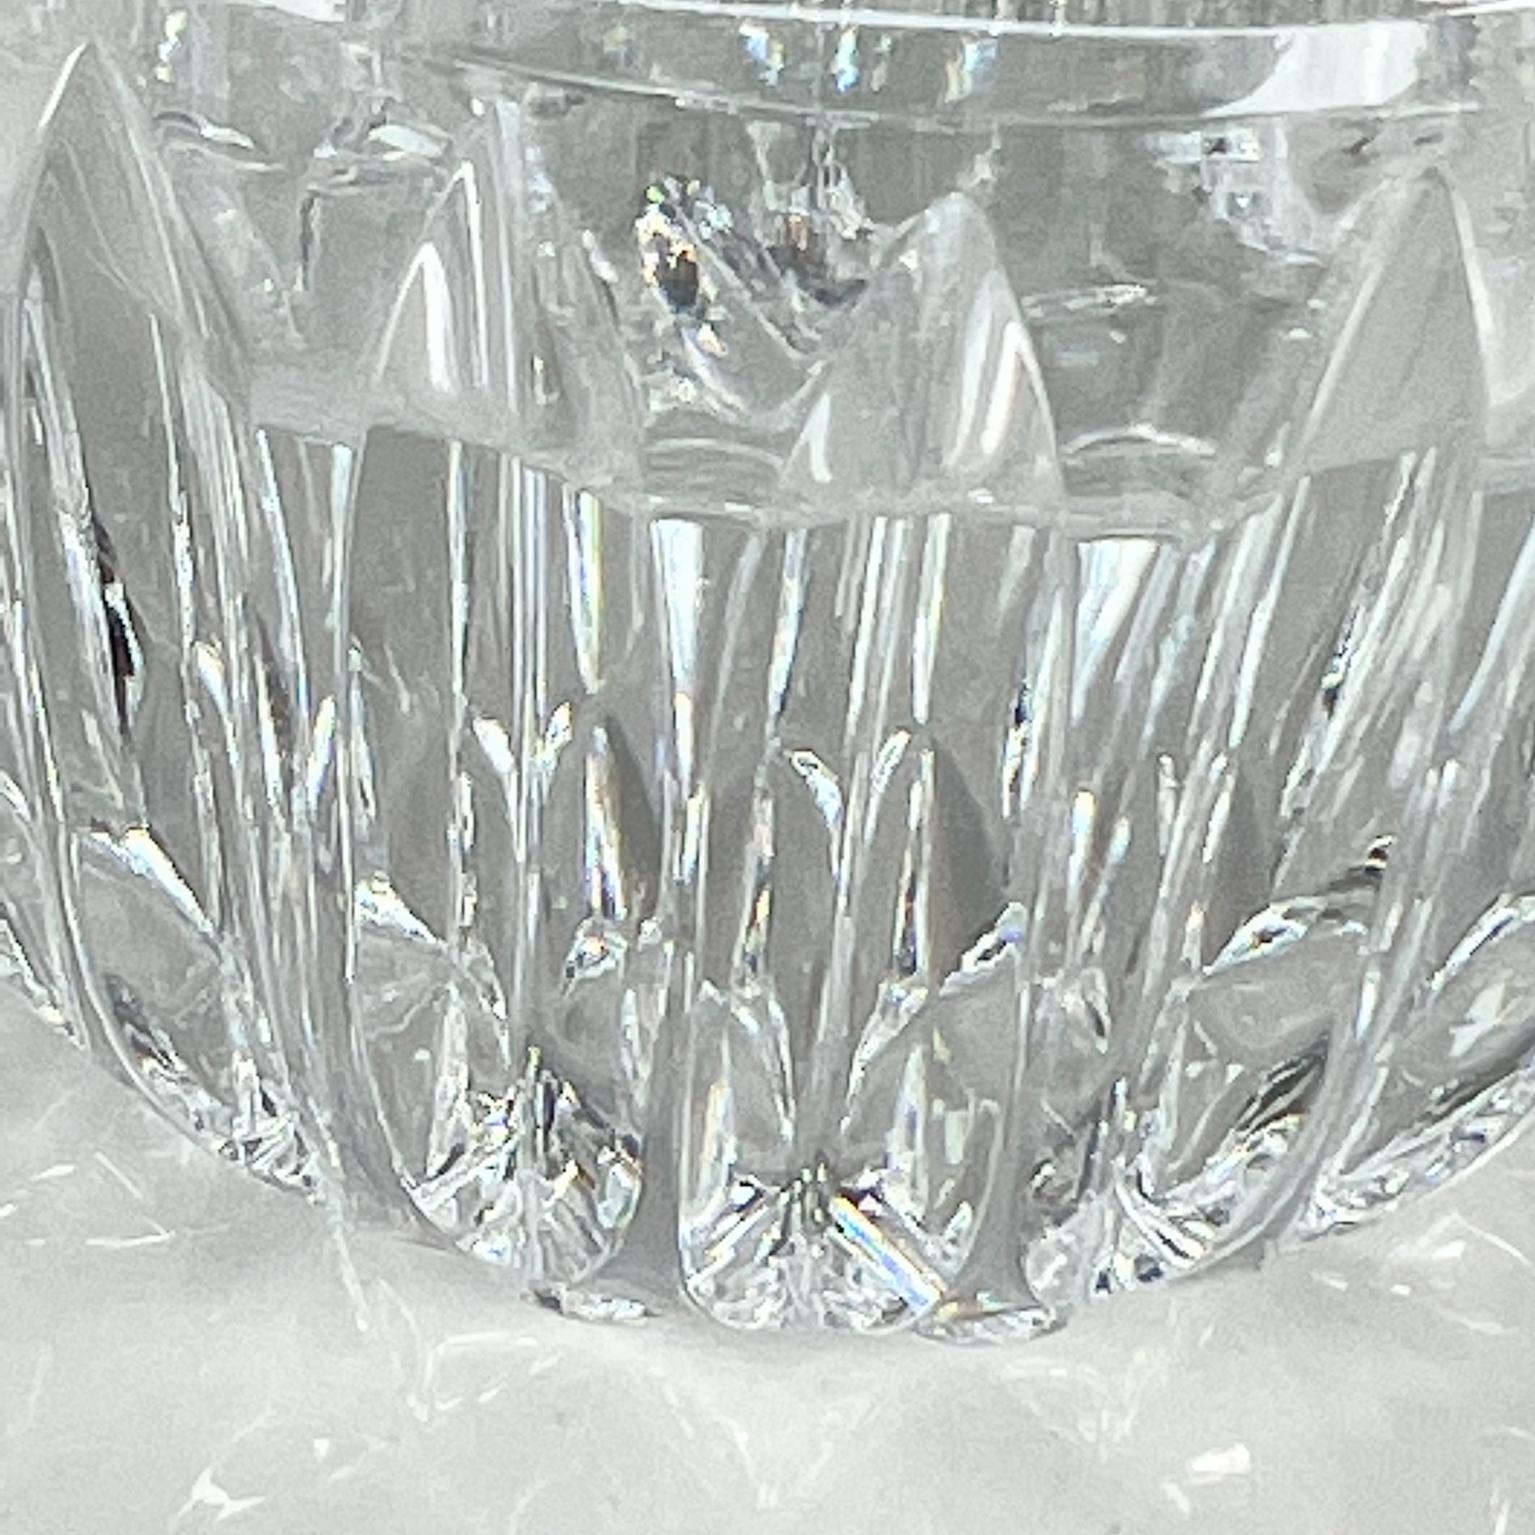 Modern Elegant Crystal Glass Votive Tealight Candle Holder by Waterford Ireland